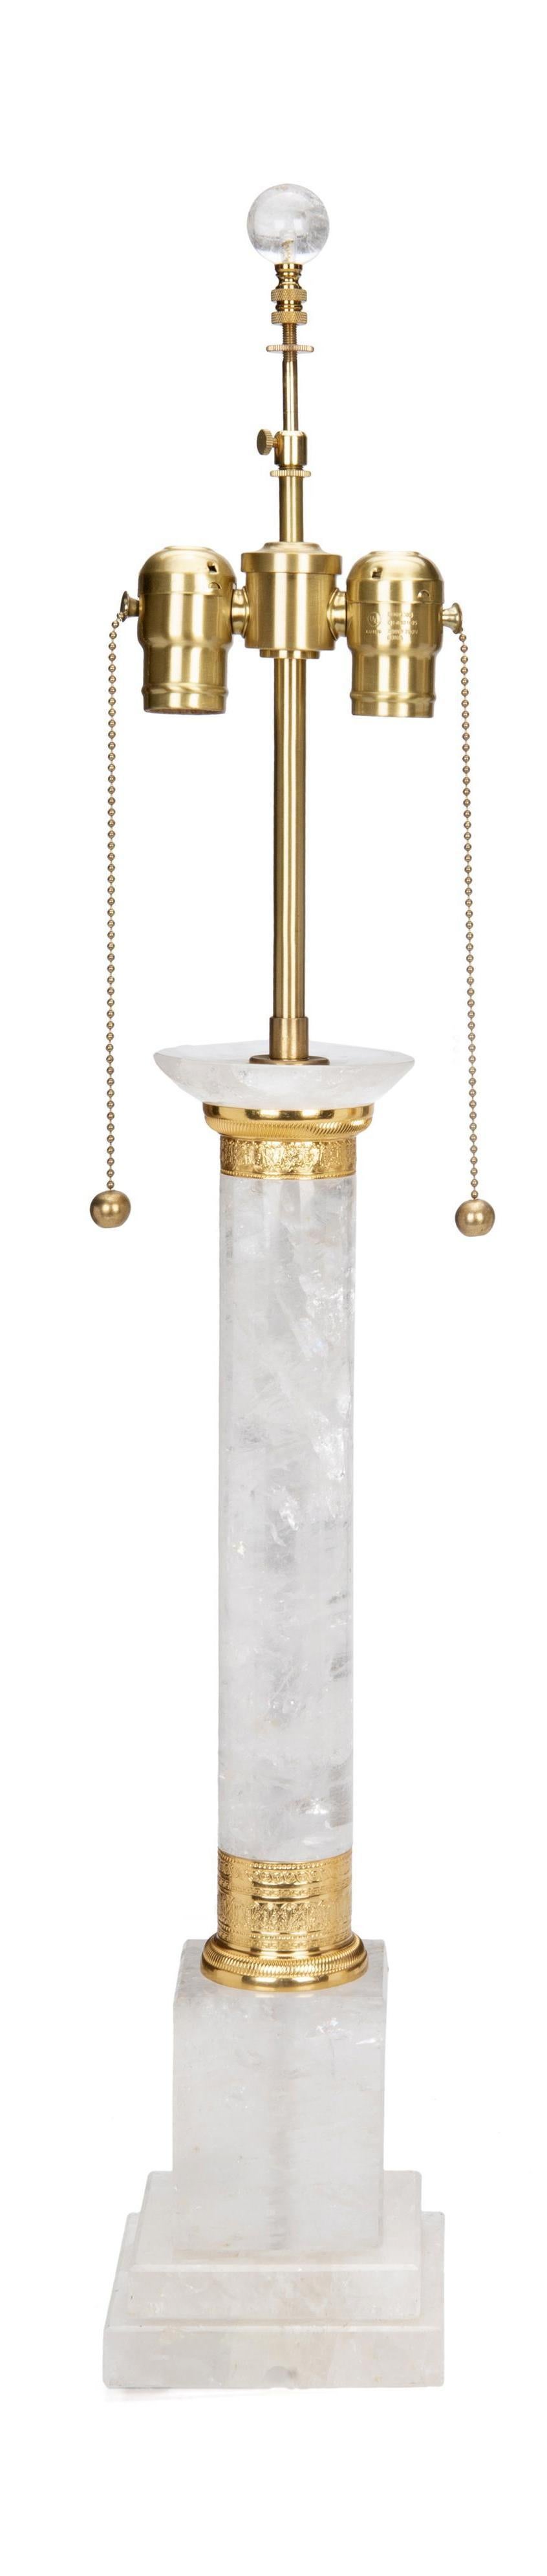 Pair of Neoclassical Style Rock Crystal and Ormolu Lamps For Sale 3